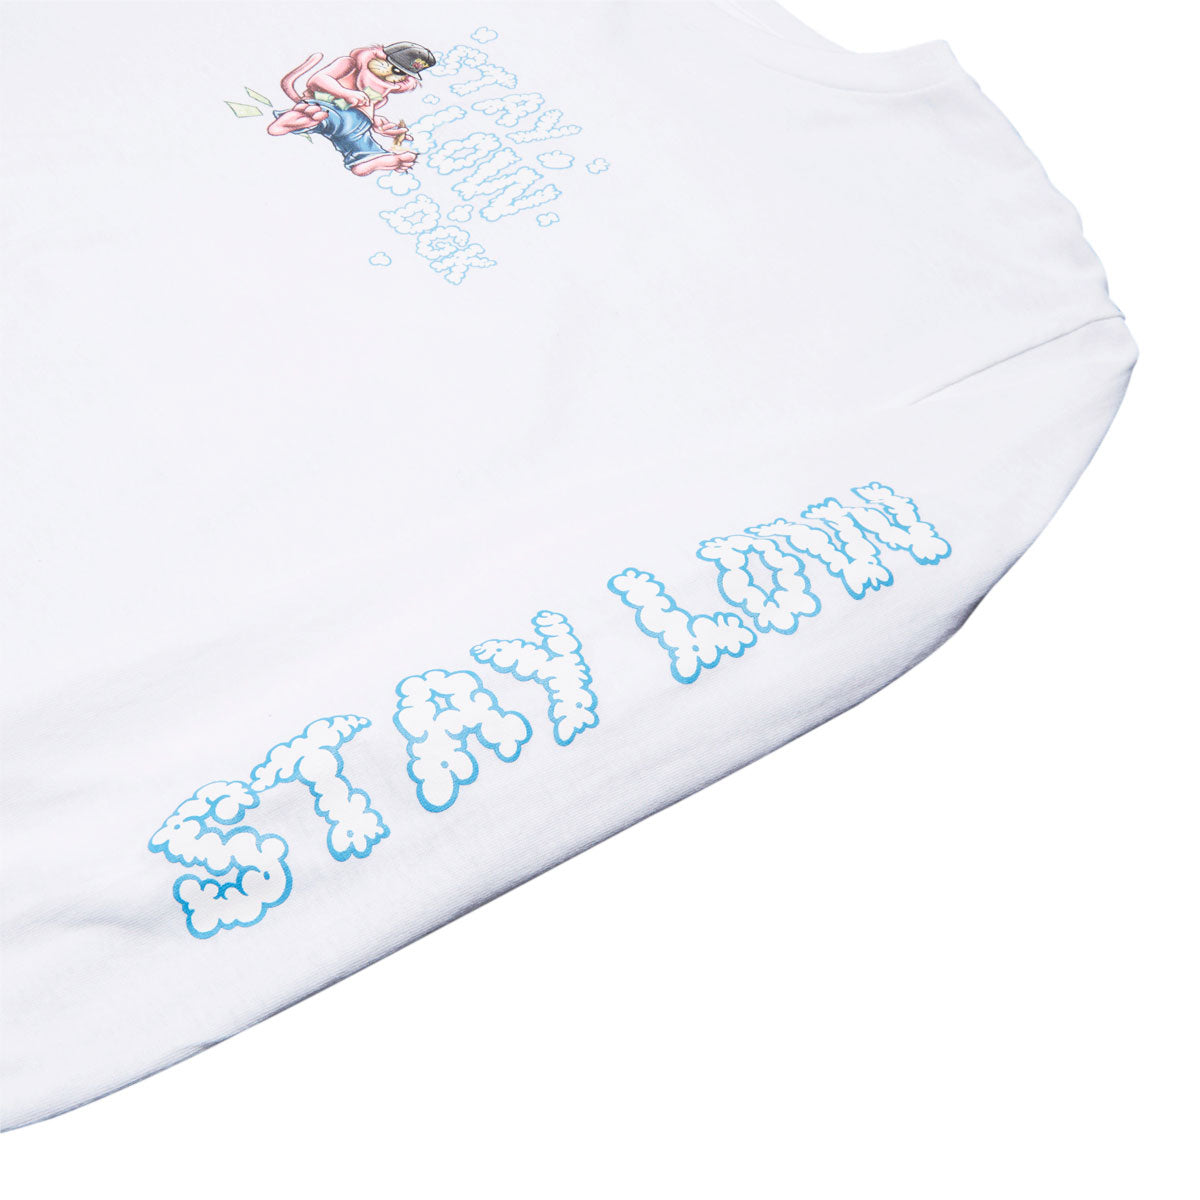 DGK Stay Low Long Sleeve T-Shirt - White image 3